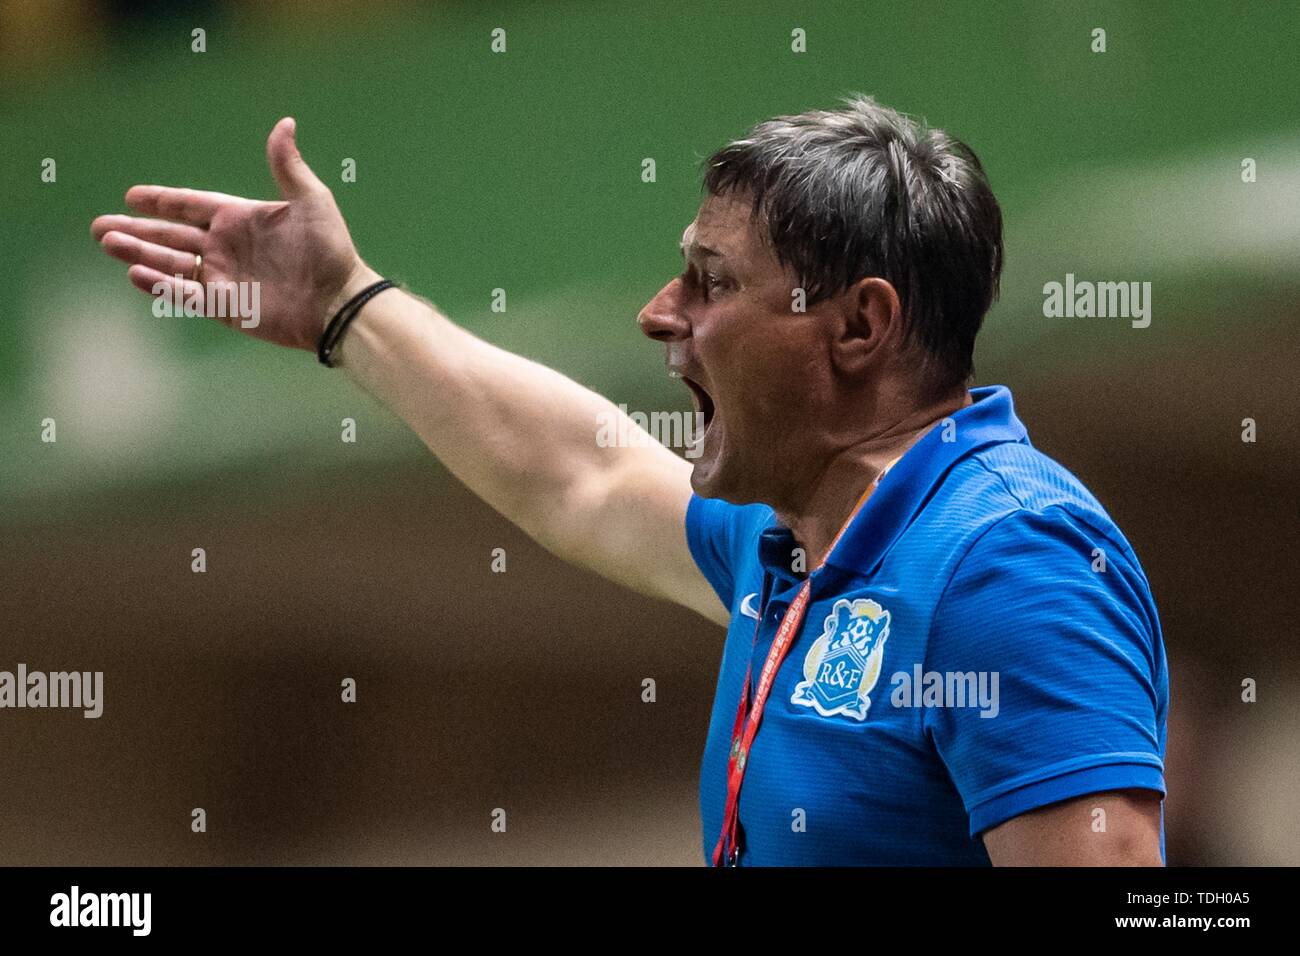 Head coach Dragan Stojkovic of Guangzhou R&F shouts instructions to his players as they compete against Wuhan Zall in their 13th round match during the 2019 Chinese Football Association Super League (CSL) in Guangzhou city, south China's Guangdong province, 15 June 2019.  Wuhan Zall defeated Guangzhou R&F 4-3. Stock Photo